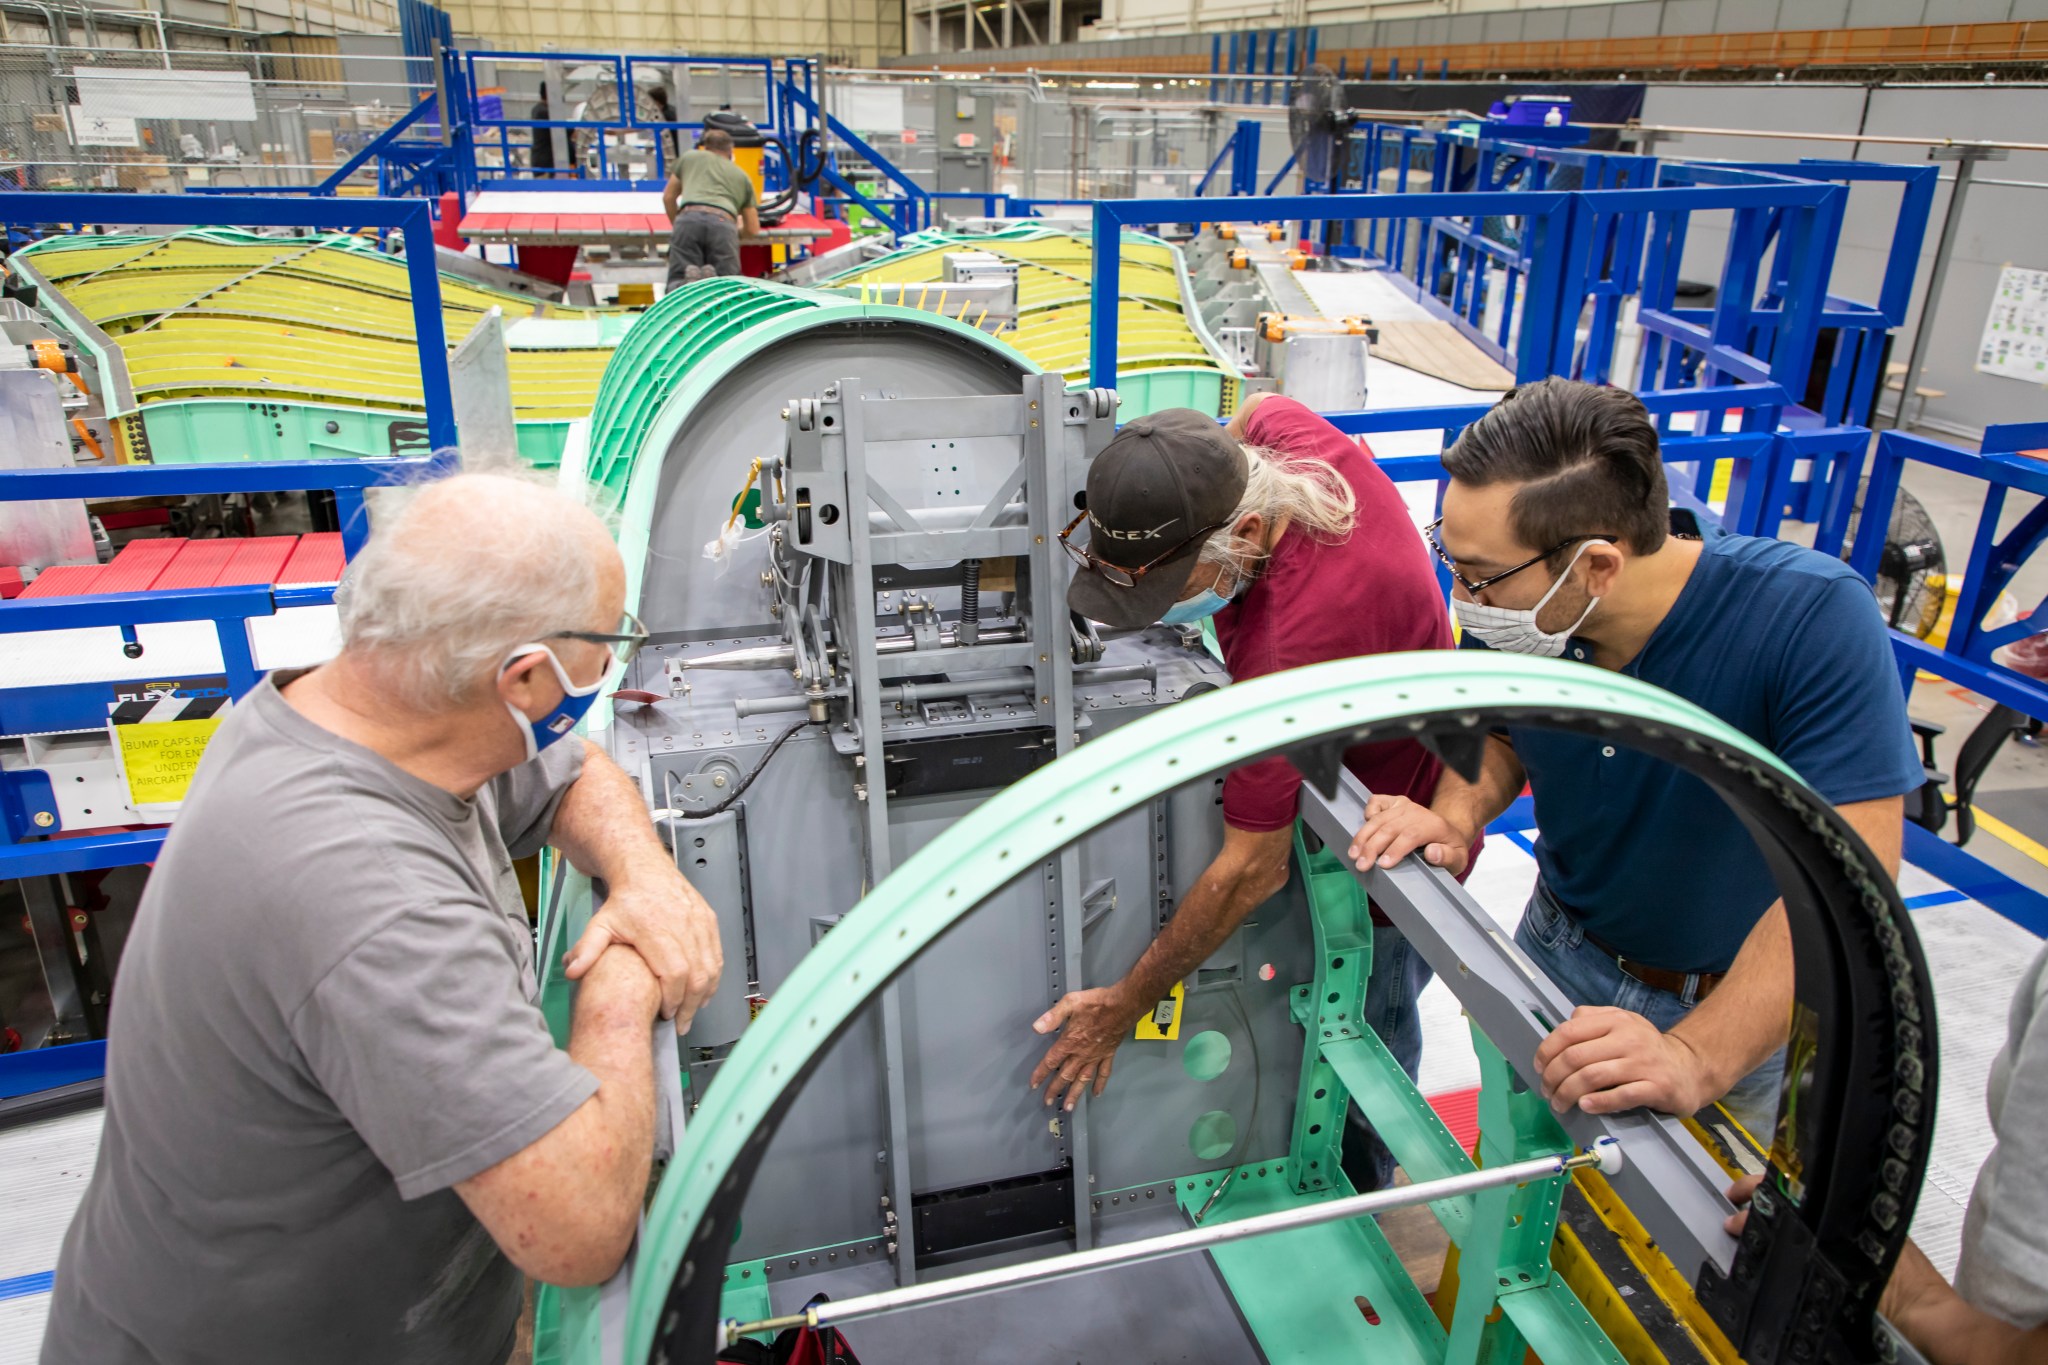 Technicians at Lockheed Martin?s Skunk Works factory in Palmdale, California examine the cockpit section of NASA?s X-59 plane.